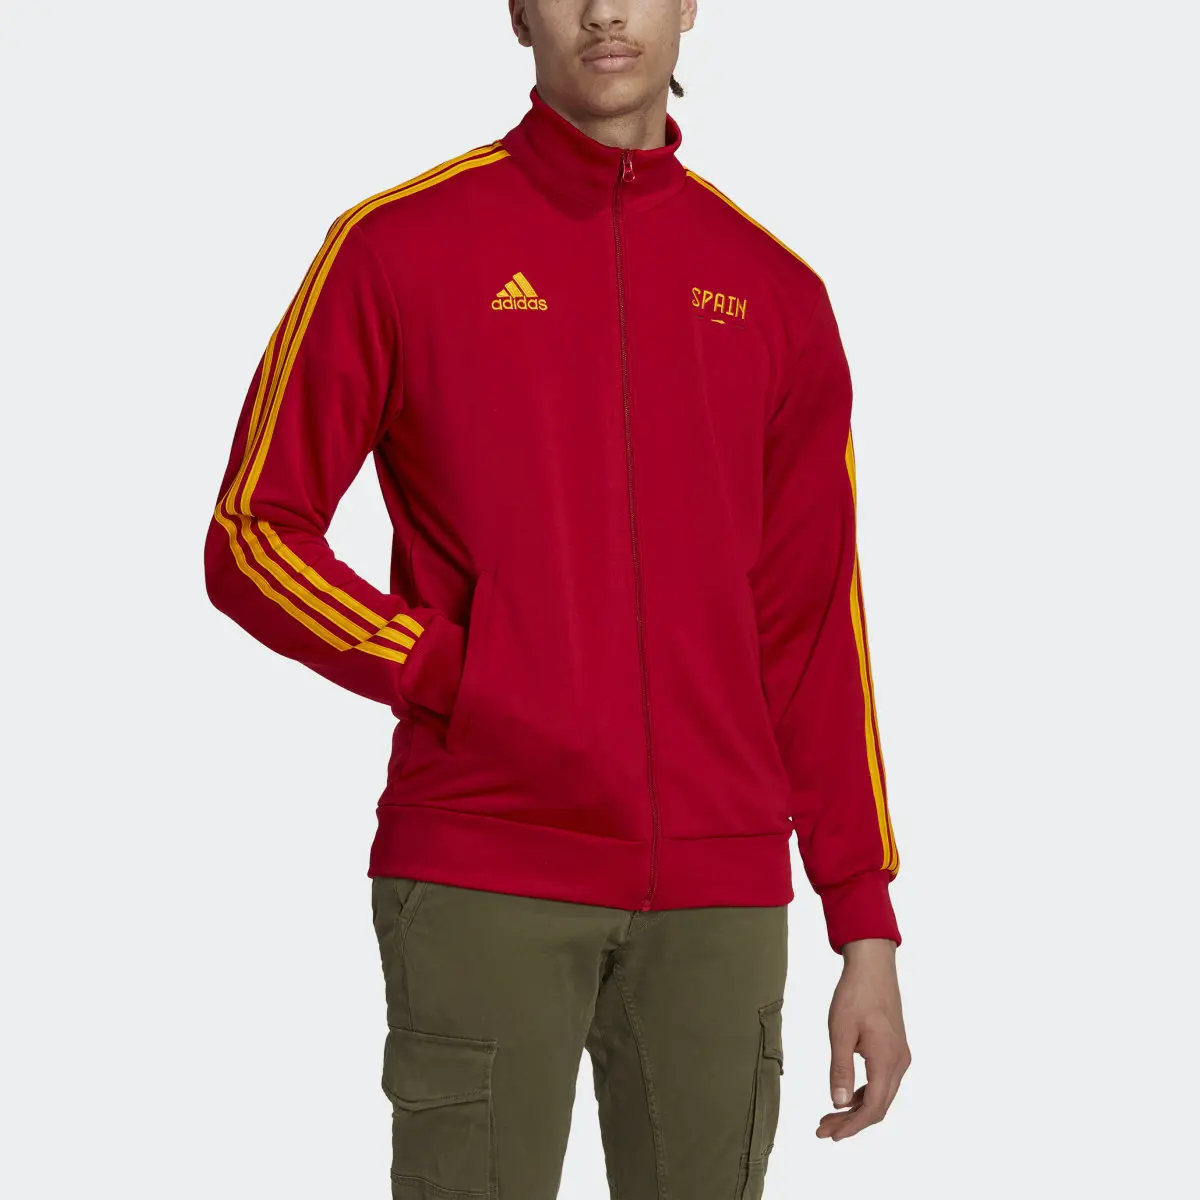 Adidas FIFA World Cup 2022™ Spain Track Top. 1